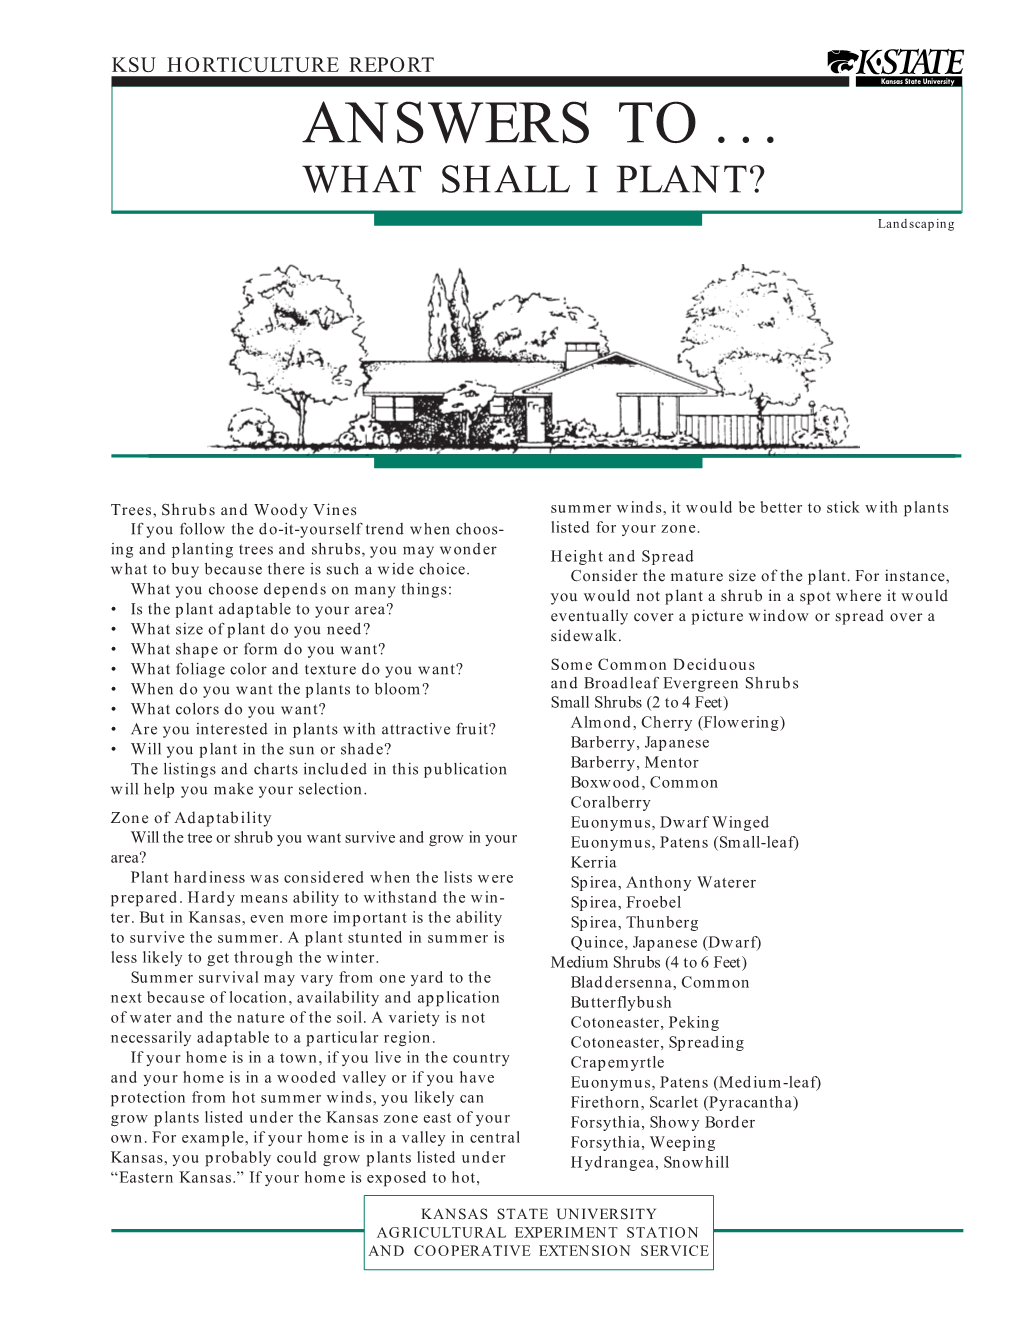 MF434 Answers To: What Shall I Plant?